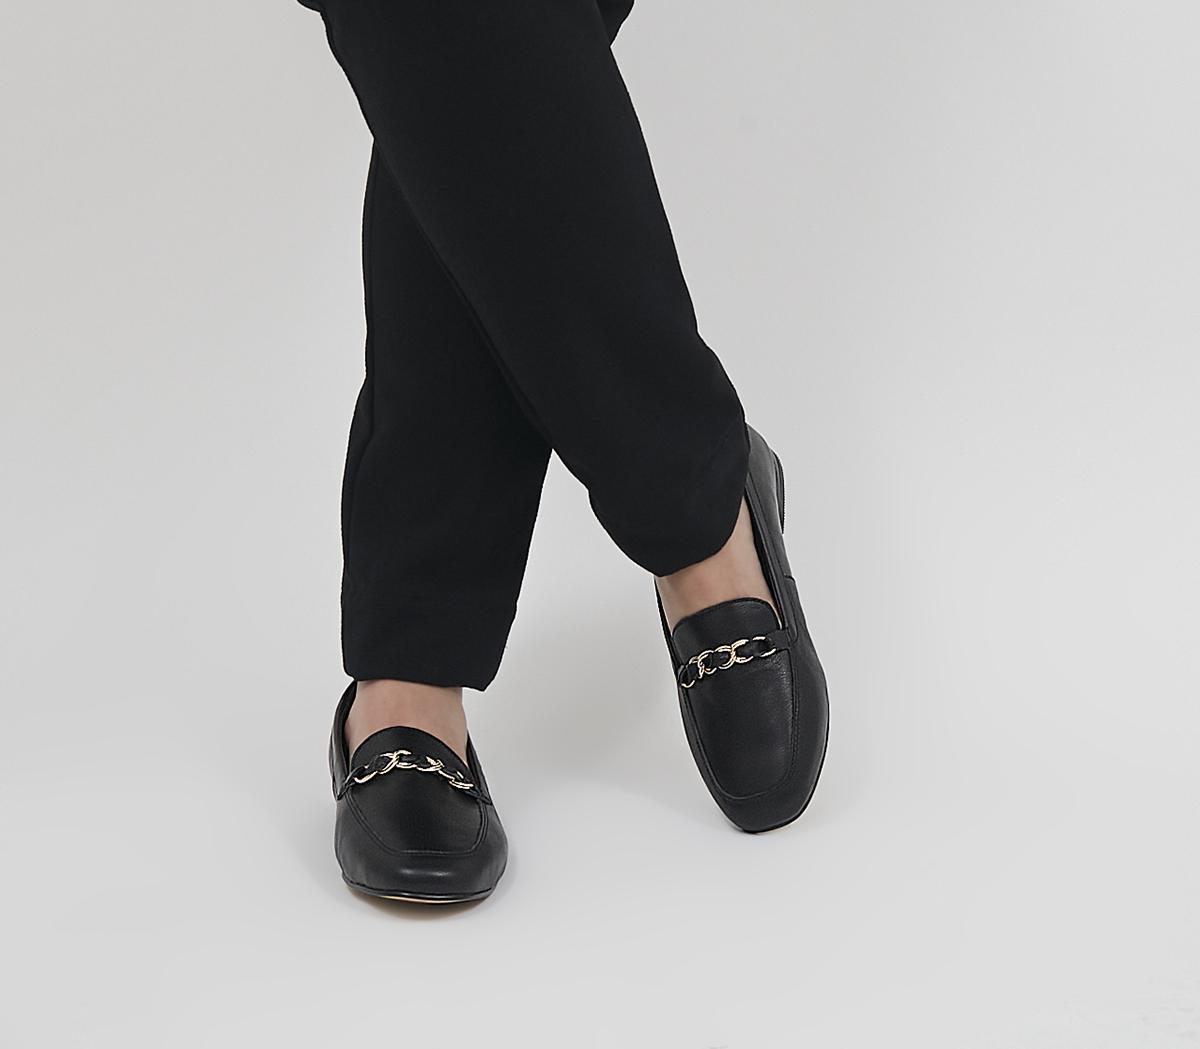 OFFICEFides Chain LoafersBlack Leather